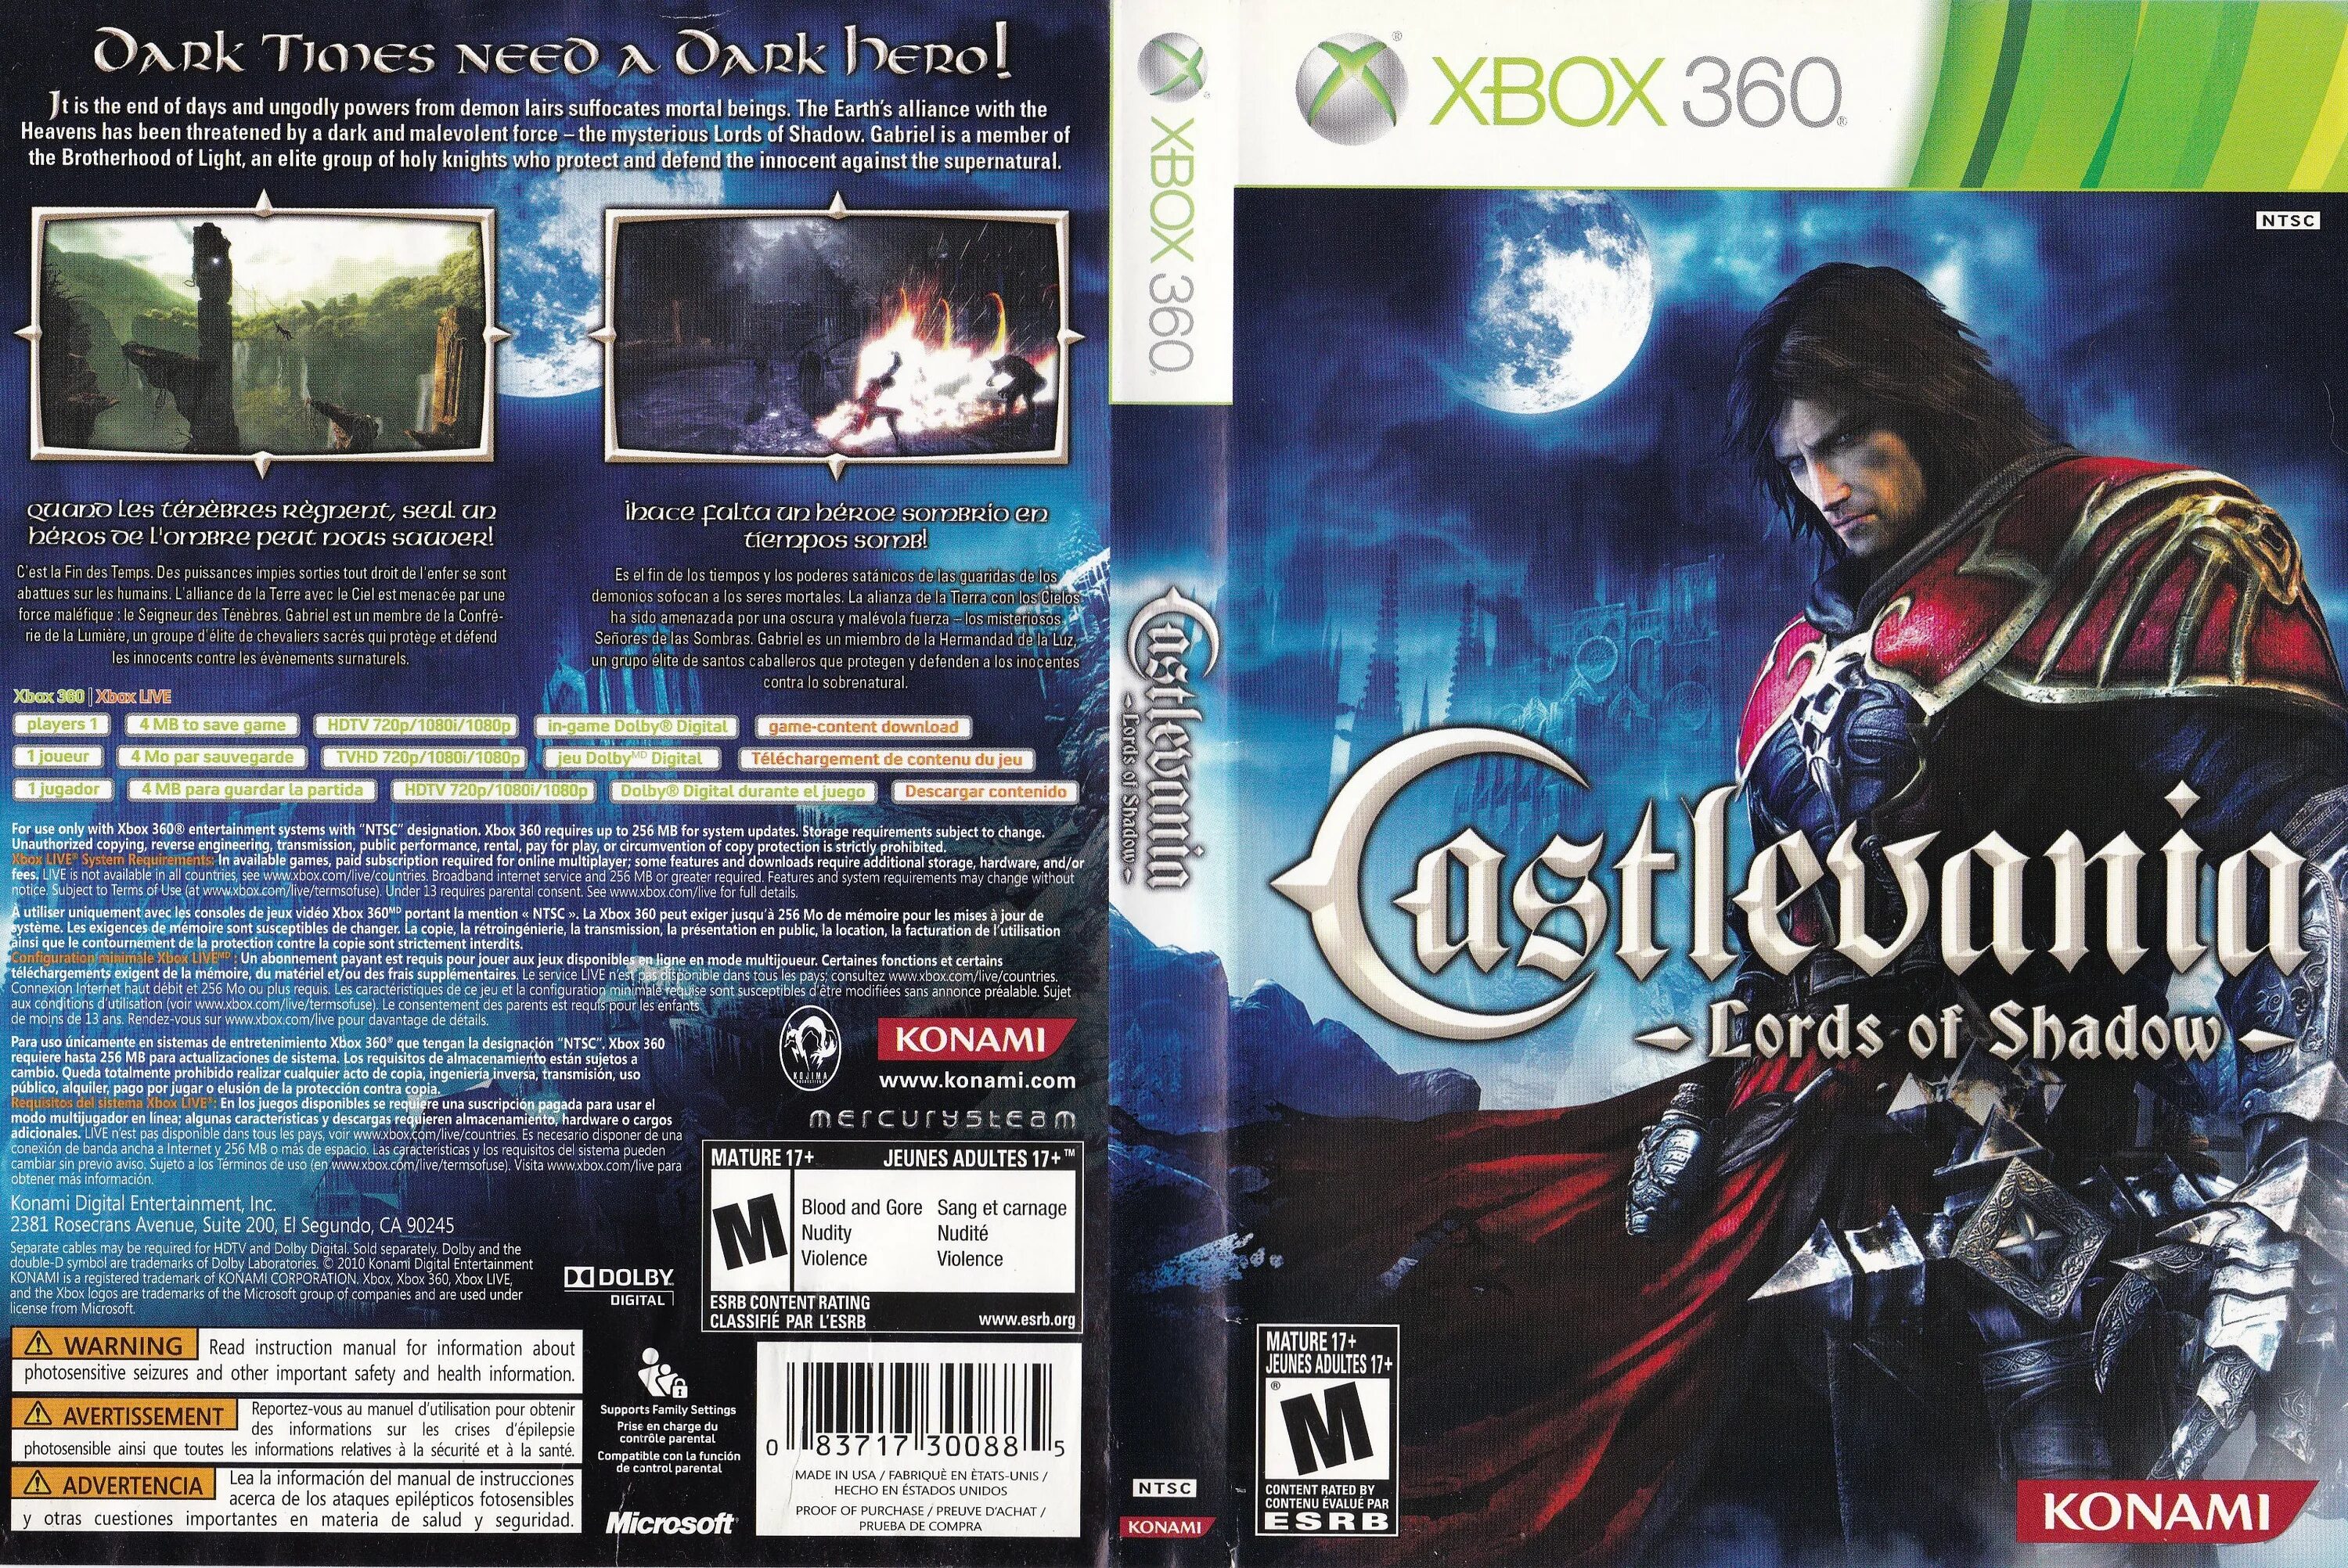 Castlevania Lords of Shadow Mirror of Fate Xbox 360 обложка. Castlevania Xbox 360 обложка. Castlevania Lords of Shadow Xbox 360. Castlevania Lords of Shadow Xbox 360 диск. Обложка shadow